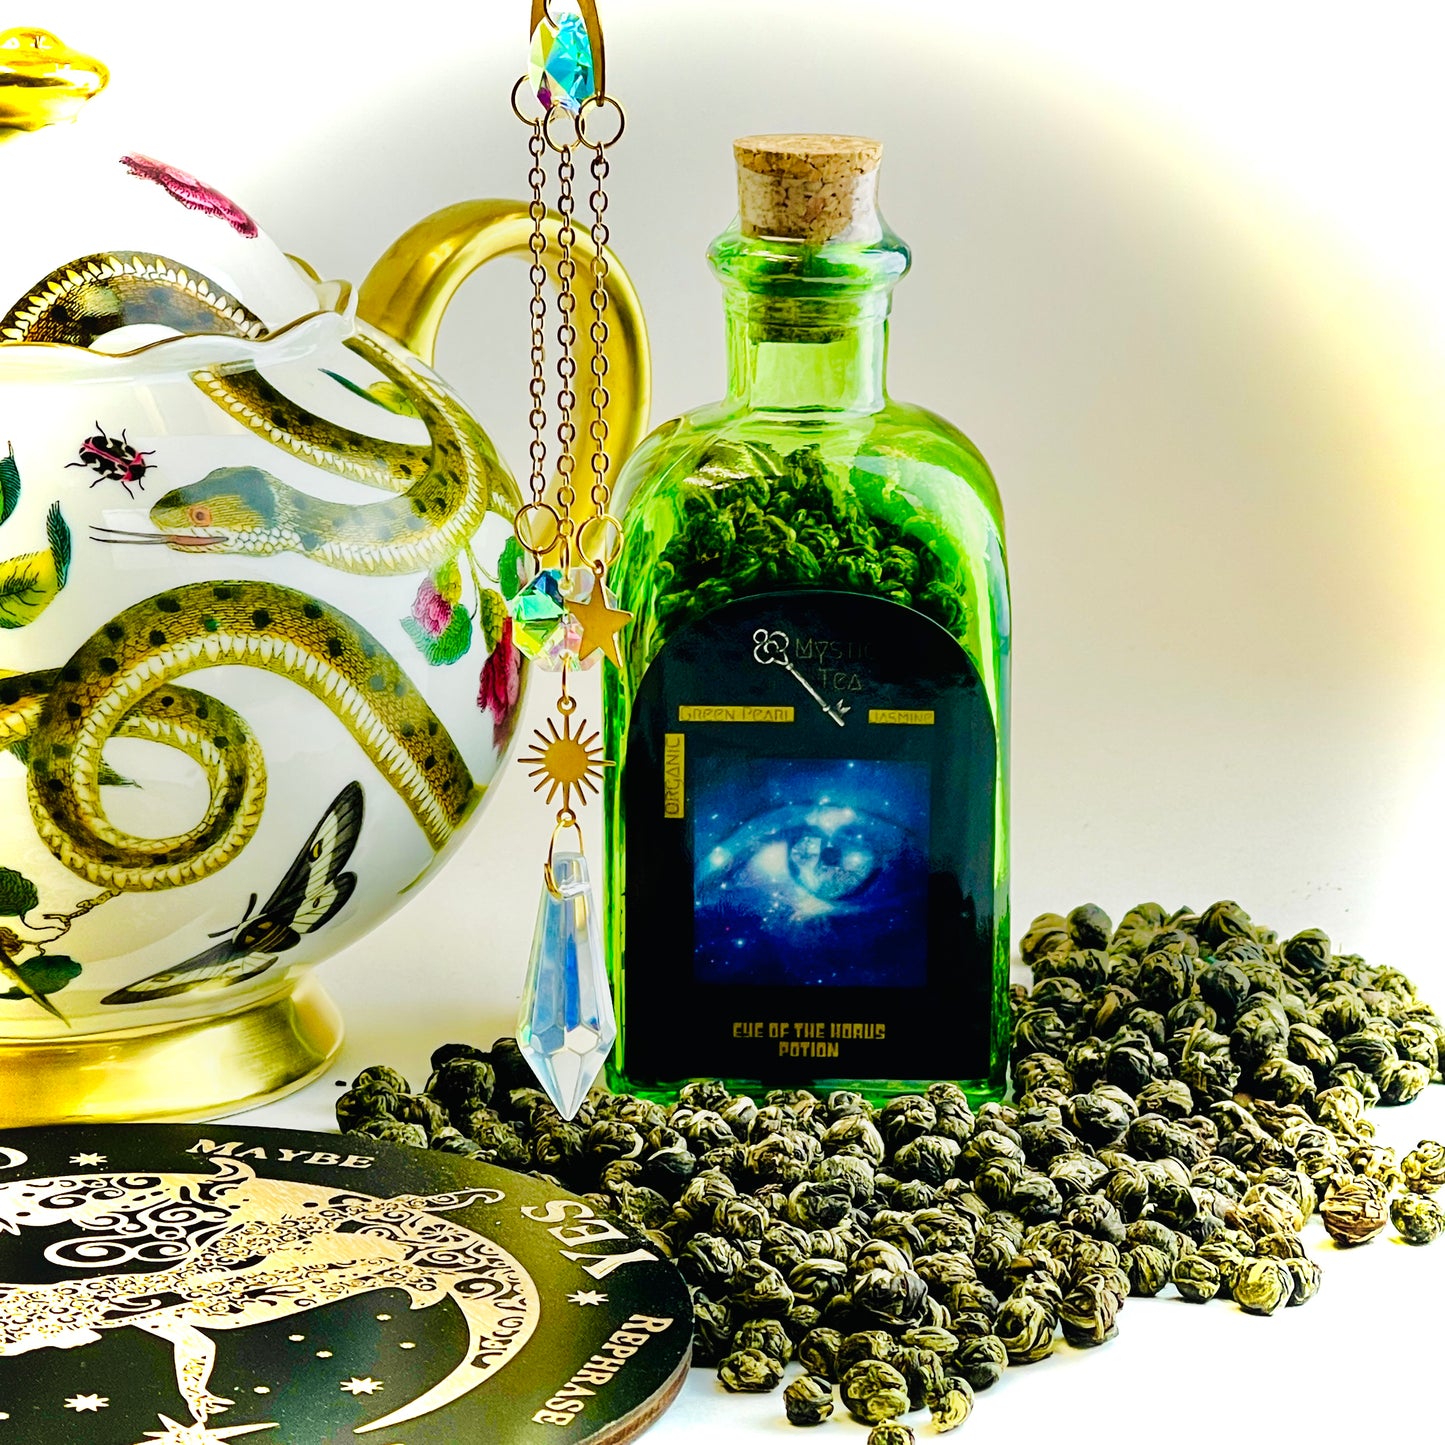 Eye of the Horus Potion Tea Green Jasmine Pearl in Green Glass Jar Cork Top Loose Leaf Sustainable Spell Intentional